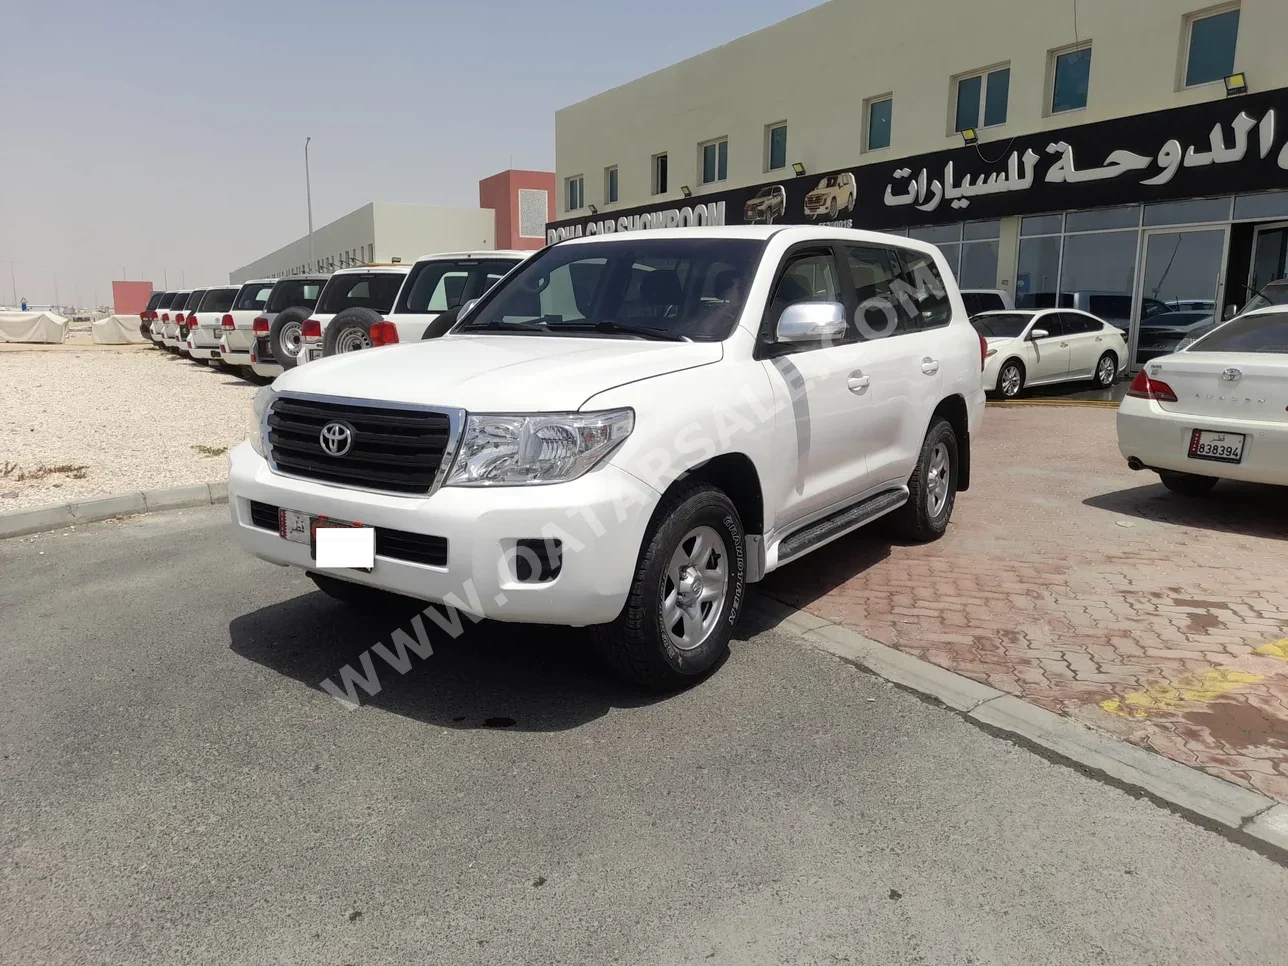 Toyota  Land Cruiser  G  2012  Automatic  186,000 Km  6 Cylinder  Four Wheel Drive (4WD)  SUV  White